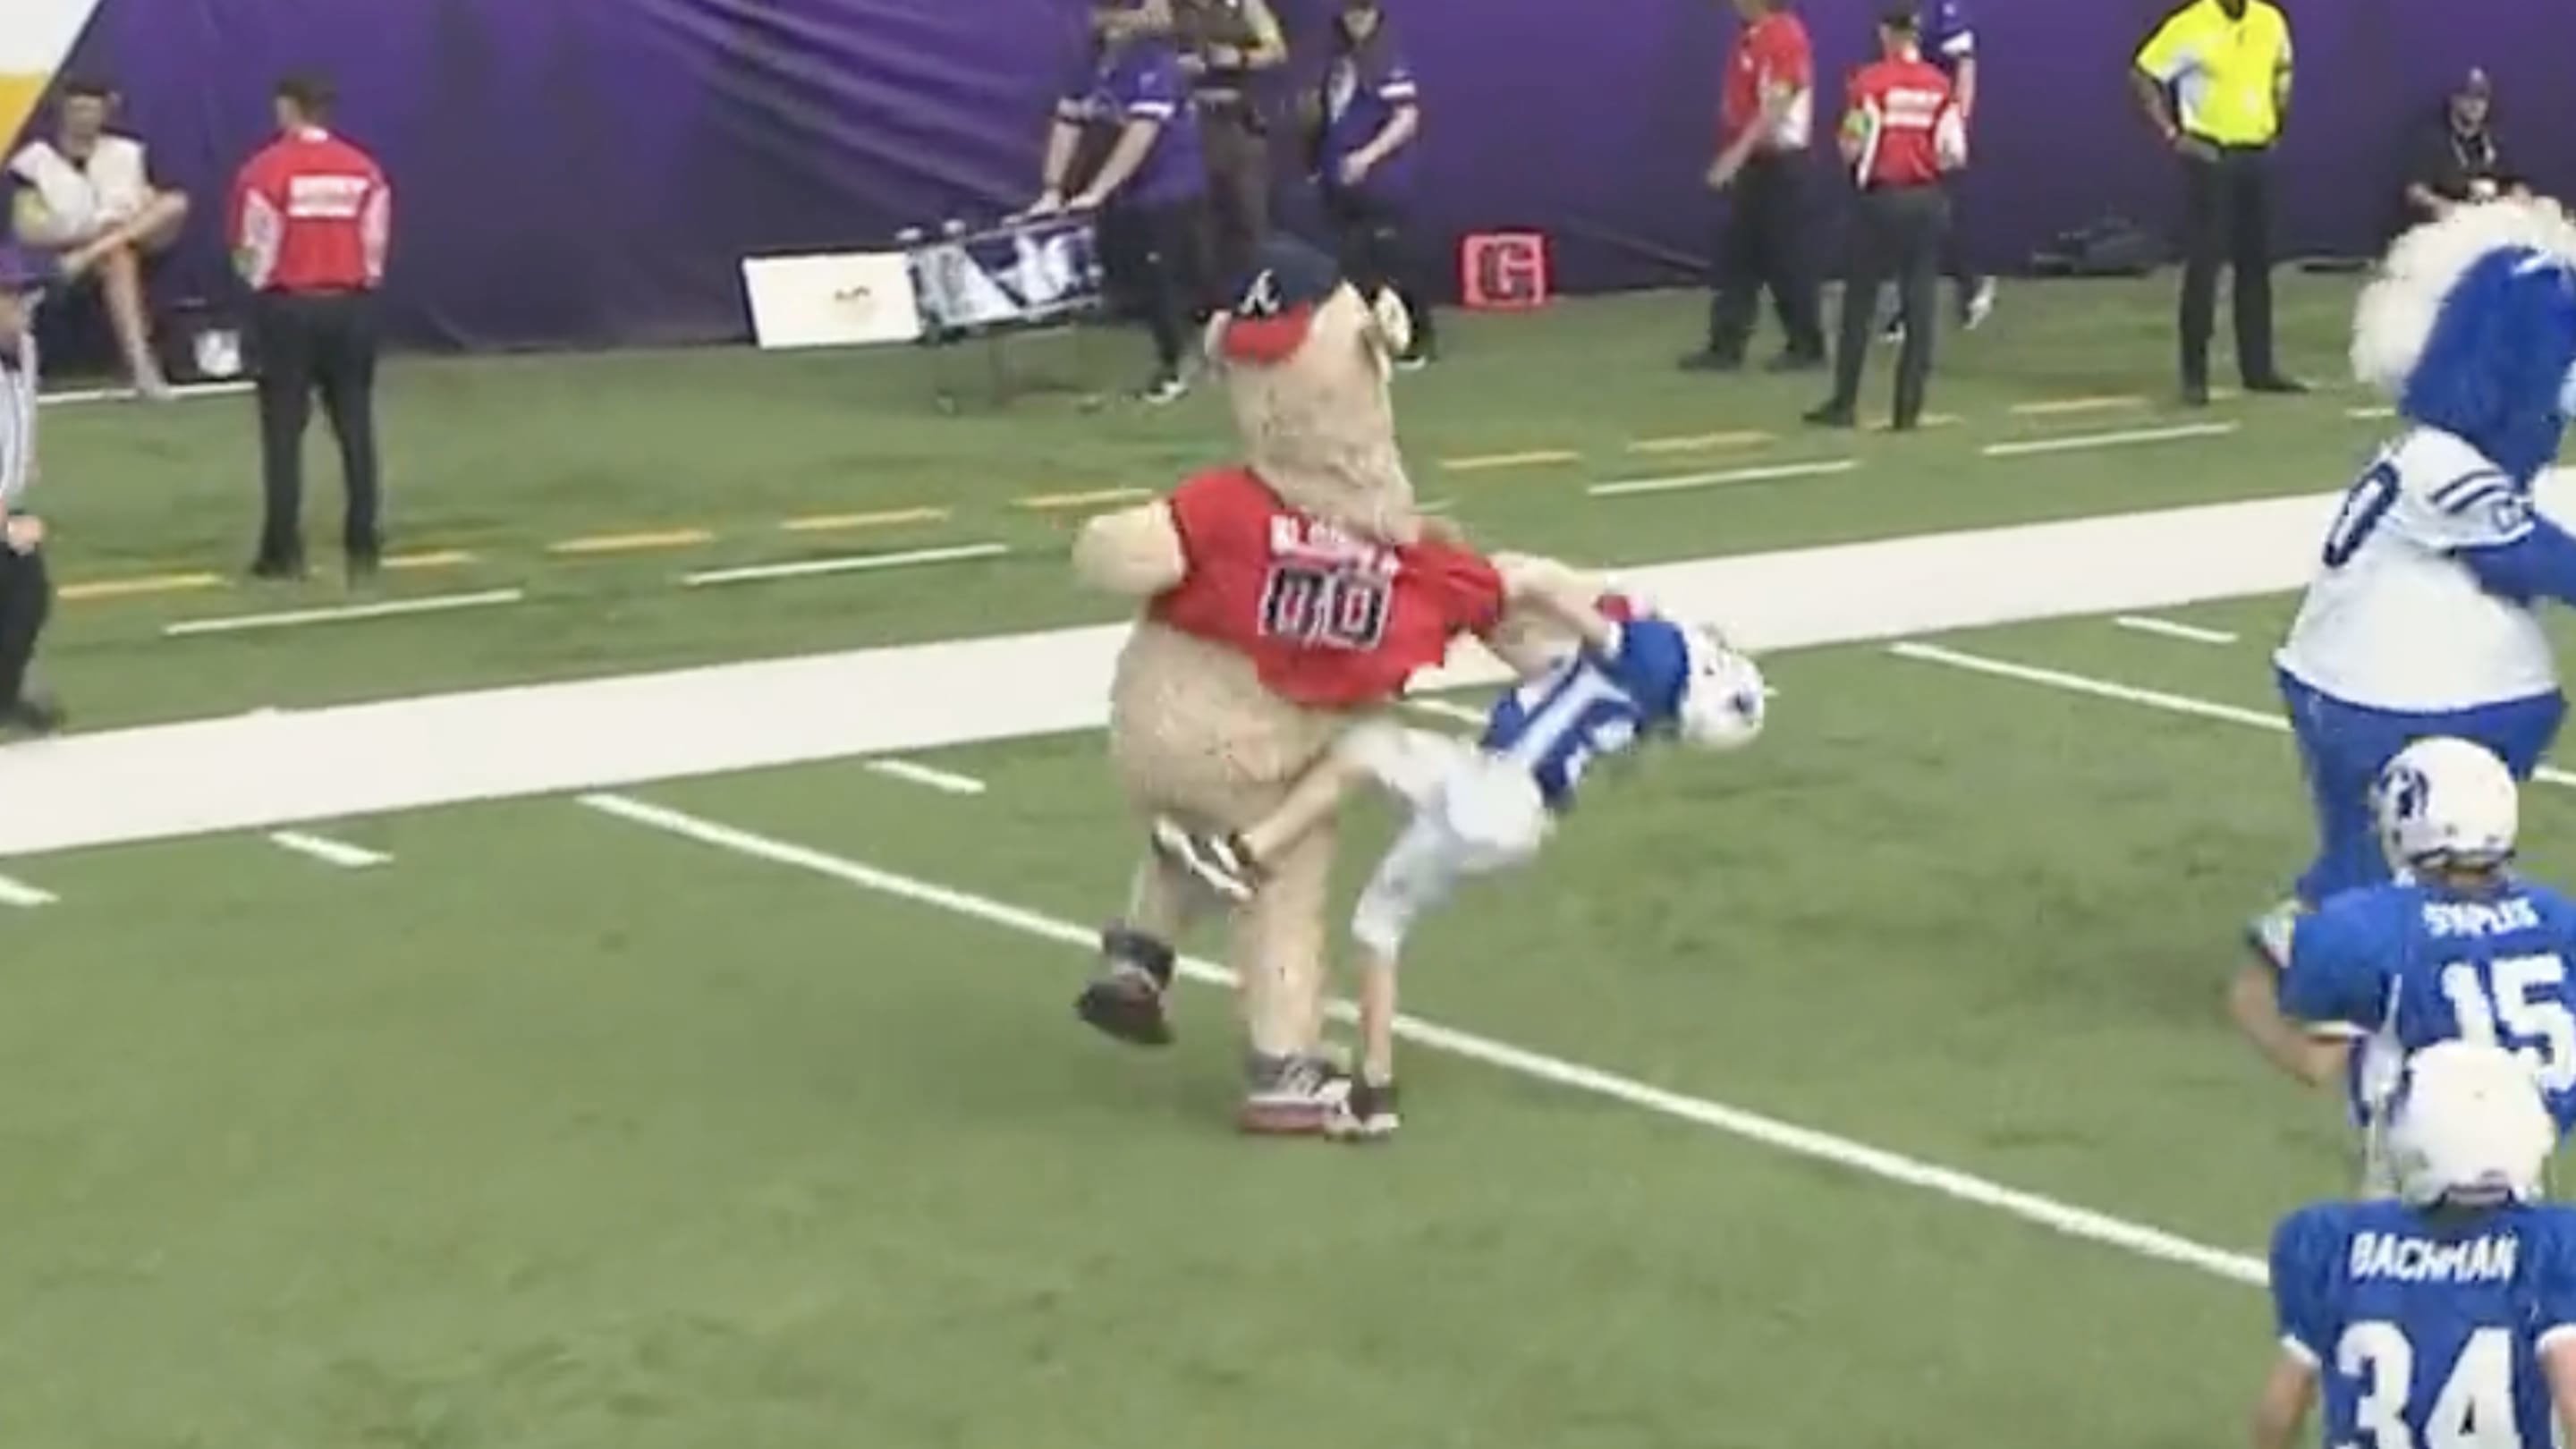 Braves Blooper Demolishes A Couple PeeWee Football Players On The Field